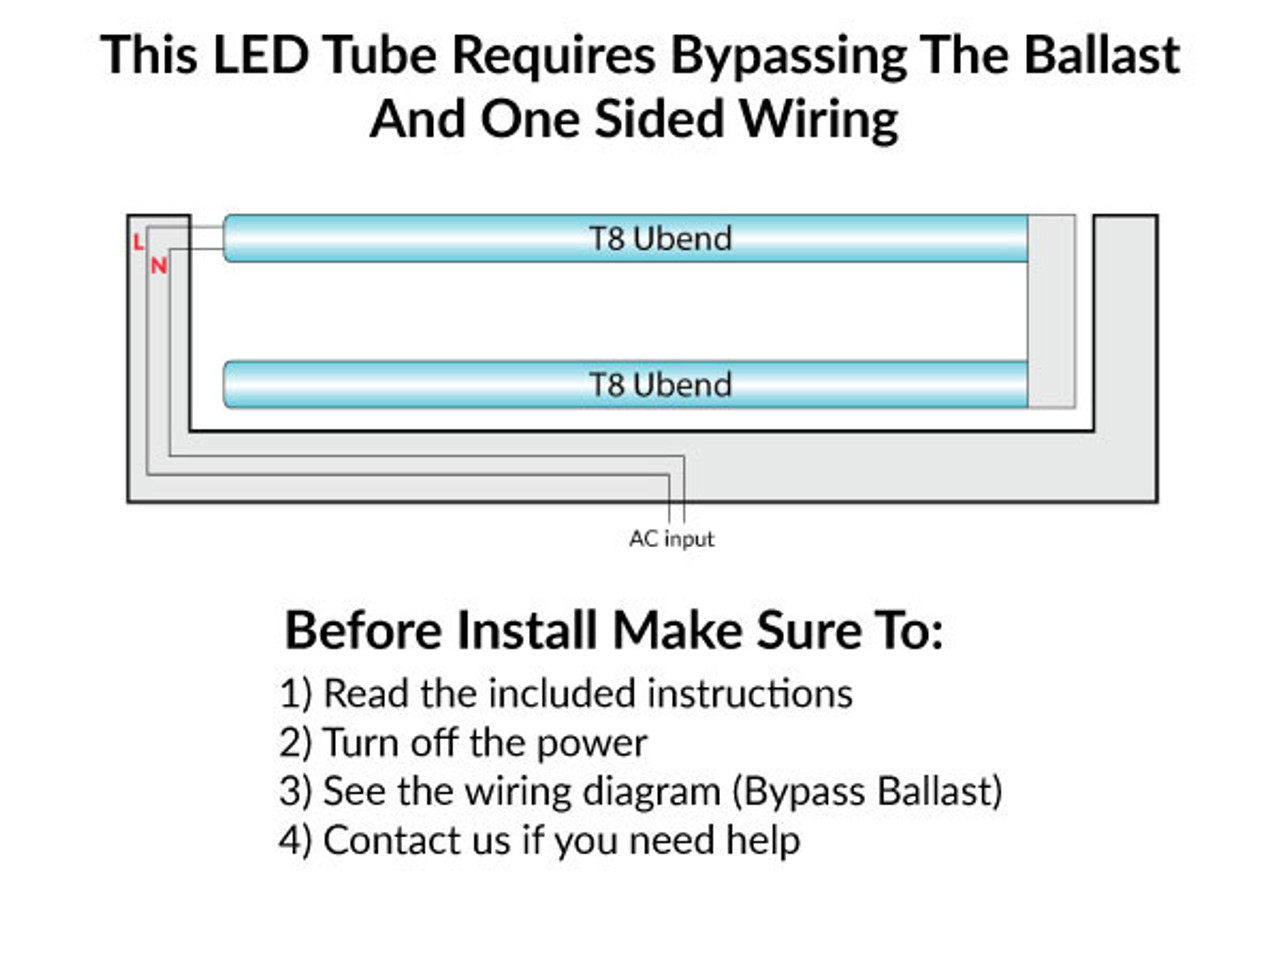 frekvens Erobre temperatur LED U Bend Tubes One Sided Wiring - Ballast Bypass Or Ballast Compatible -  12 Watt - Choose Your Color Temperature